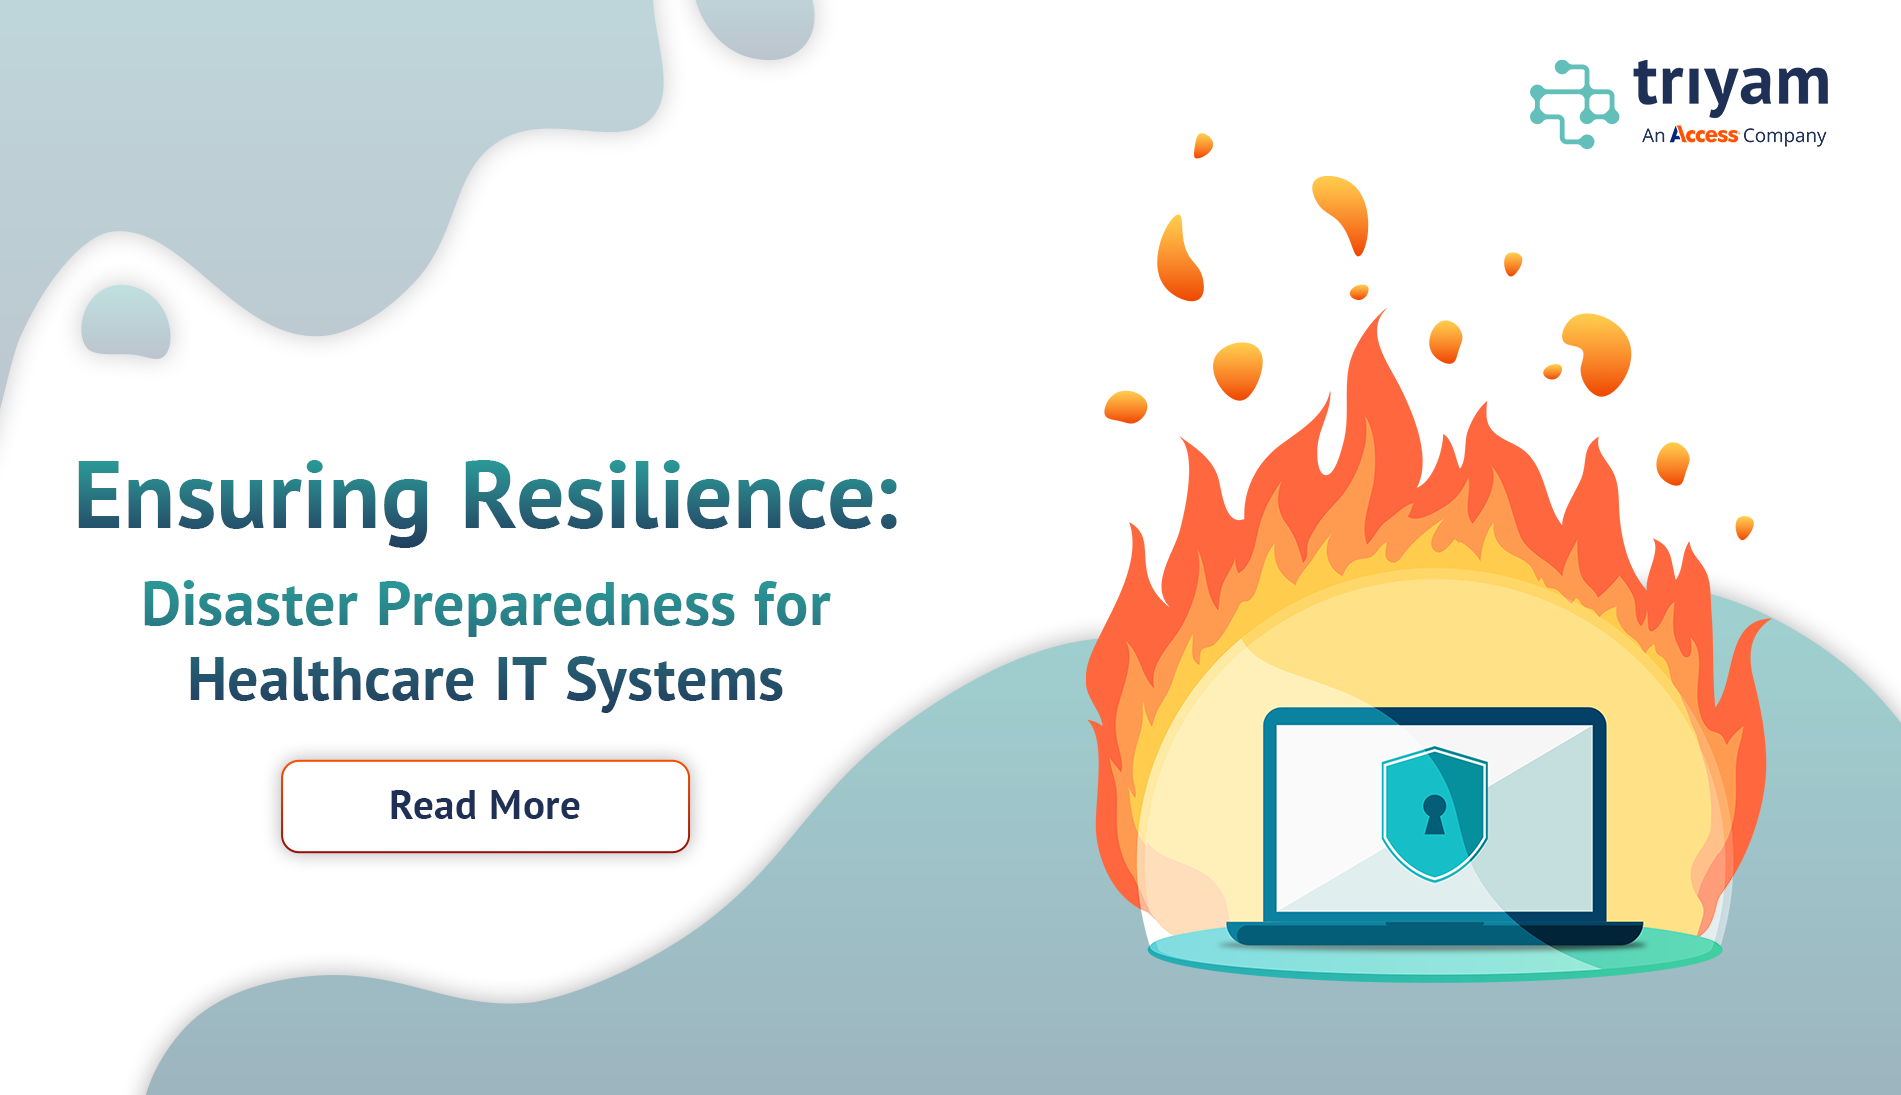 Ensuring Resilience: Disaster Preparedness for Healthcare IT Systems